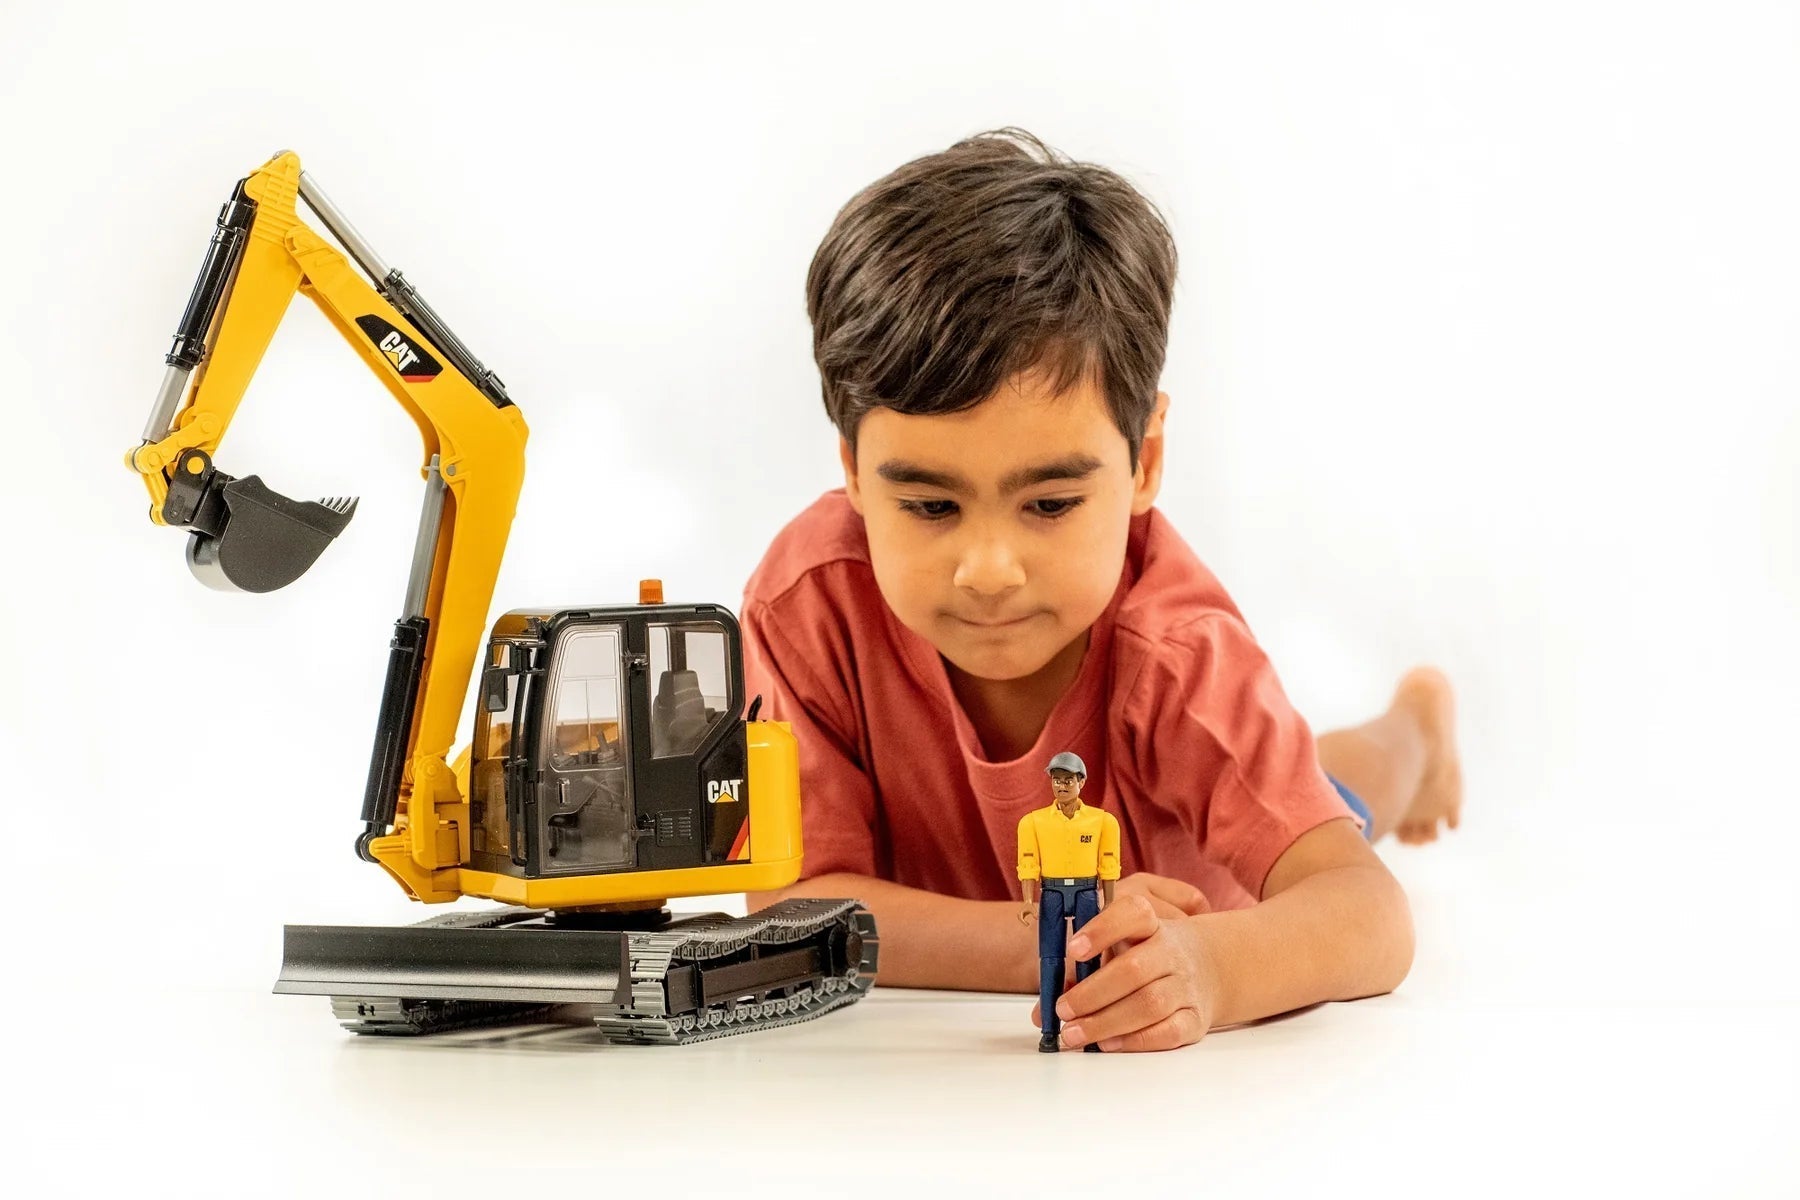 Bruder-CATERPILLAR Mini Excavator with worker-02467-Legacy Toys